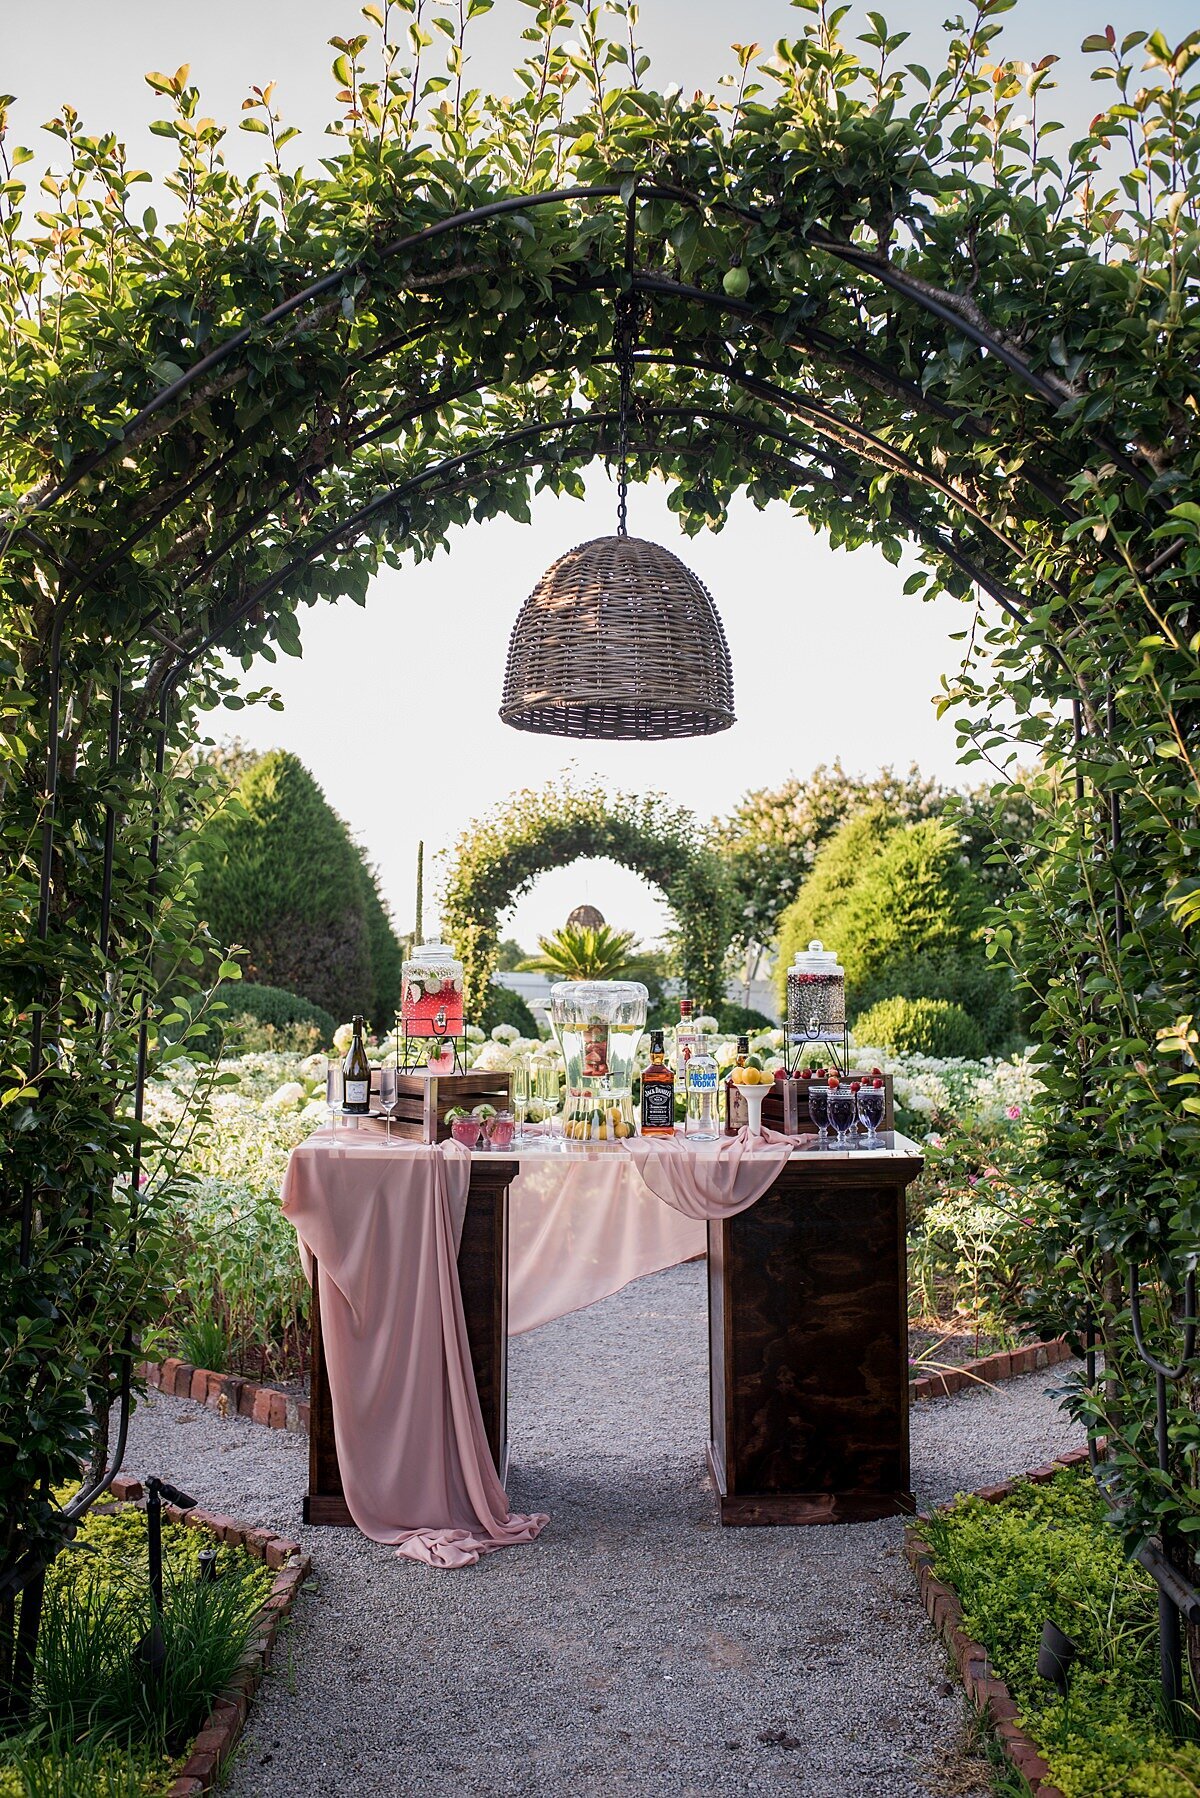 A dark wood bar covered with a draping sheer organza blush table runner has a large wicker bell shaped chandelier hanging from an arched wisteria arbor in the lush garden at Carnton Plantation. The bar is topped with three glass dispensers with signature cocktails an assortment of liquor bottles and highball glasses.